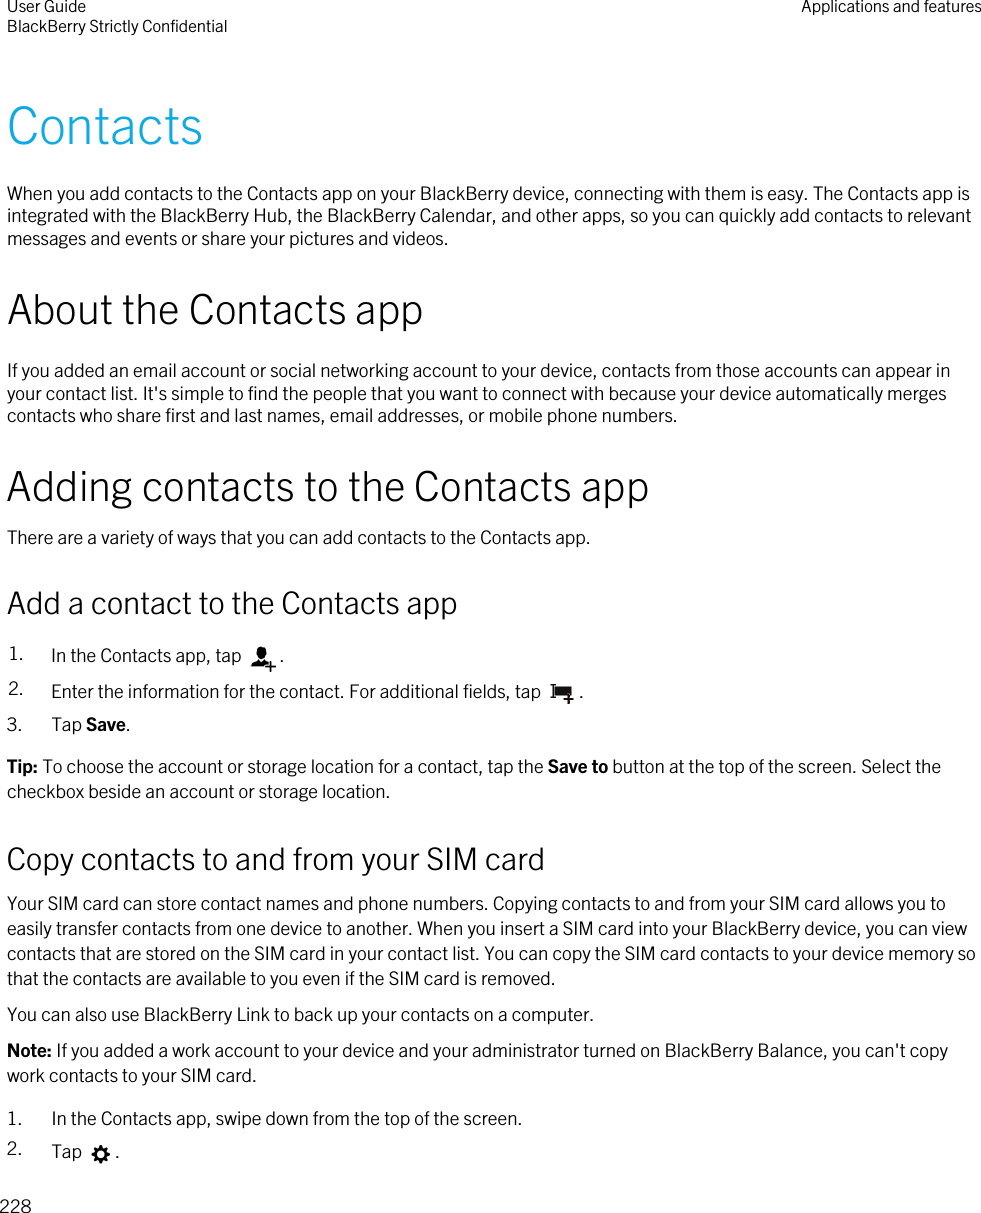 ContactsWhen you add contacts to the Contacts app on your BlackBerry device, connecting with them is easy. The Contacts app is integrated with the BlackBerry Hub, the BlackBerry Calendar, and other apps, so you can quickly add contacts to relevant messages and events or share your pictures and videos.About the Contacts appIf you added an email account or social networking account to your device, contacts from those accounts can appear in your contact list. It&apos;s simple to find the people that you want to connect with because your device automatically merges contacts who share first and last names, email addresses, or mobile phone numbers.Adding contacts to the Contacts appThere are a variety of ways that you can add contacts to the Contacts app.Add a contact to the Contacts app1. In the Contacts app, tap  .2. Enter the information for the contact. For additional fields, tap  .3. Tap Save.Tip: To choose the account or storage location for a contact, tap the Save to button at the top of the screen. Select the checkbox beside an account or storage location.Copy contacts to and from your SIM cardYour SIM card can store contact names and phone numbers. Copying contacts to and from your SIM card allows you to easily transfer contacts from one device to another. When you insert a SIM card into your BlackBerry device, you can view contacts that are stored on the SIM card in your contact list. You can copy the SIM card contacts to your device memory so that the contacts are available to you even if the SIM card is removed.You can also use BlackBerry Link to back up your contacts on a computer.Note: If you added a work account to your device and your administrator turned on BlackBerry Balance, you can&apos;t copy work contacts to your SIM card.1. In the Contacts app, swipe down from the top of the screen.2. Tap  .User GuideBlackBerry Strictly Confidential Applications and features228